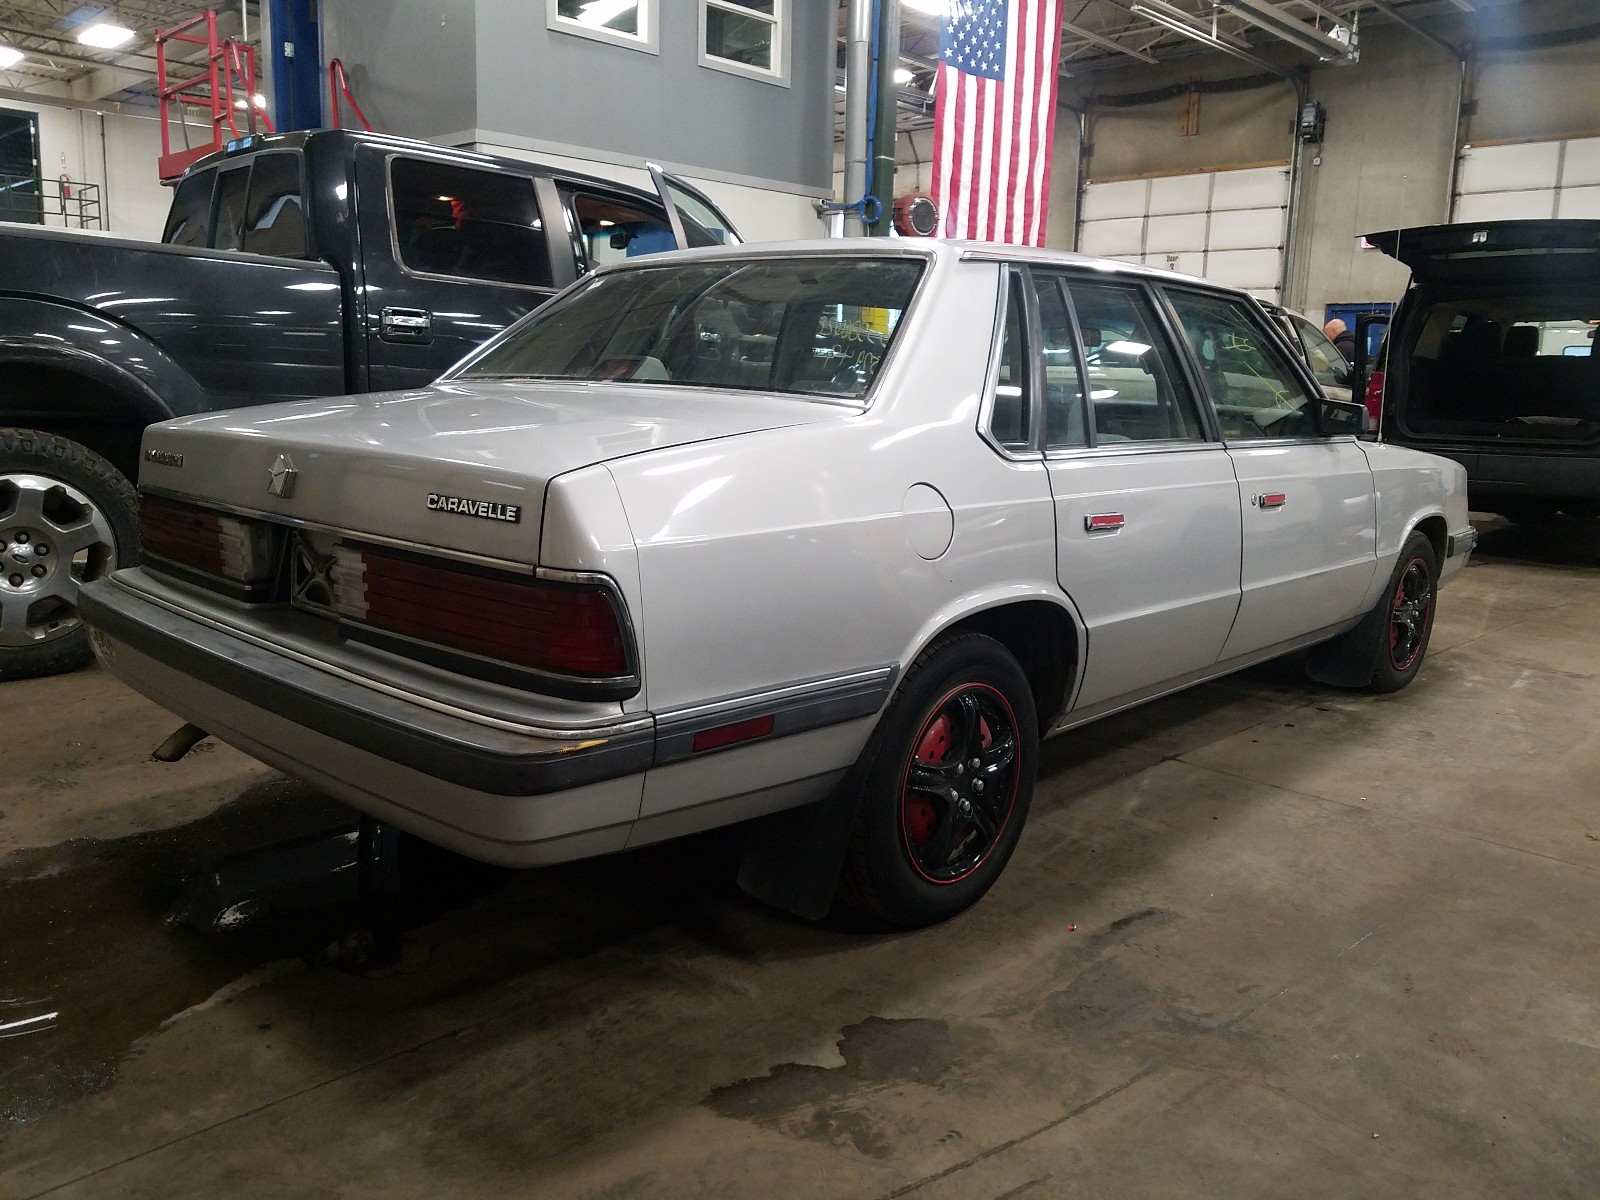 85t1xwzi1mw wm https www salvagereseller com cars for sale 53586620 1987 plymouth caravelle blaine mn